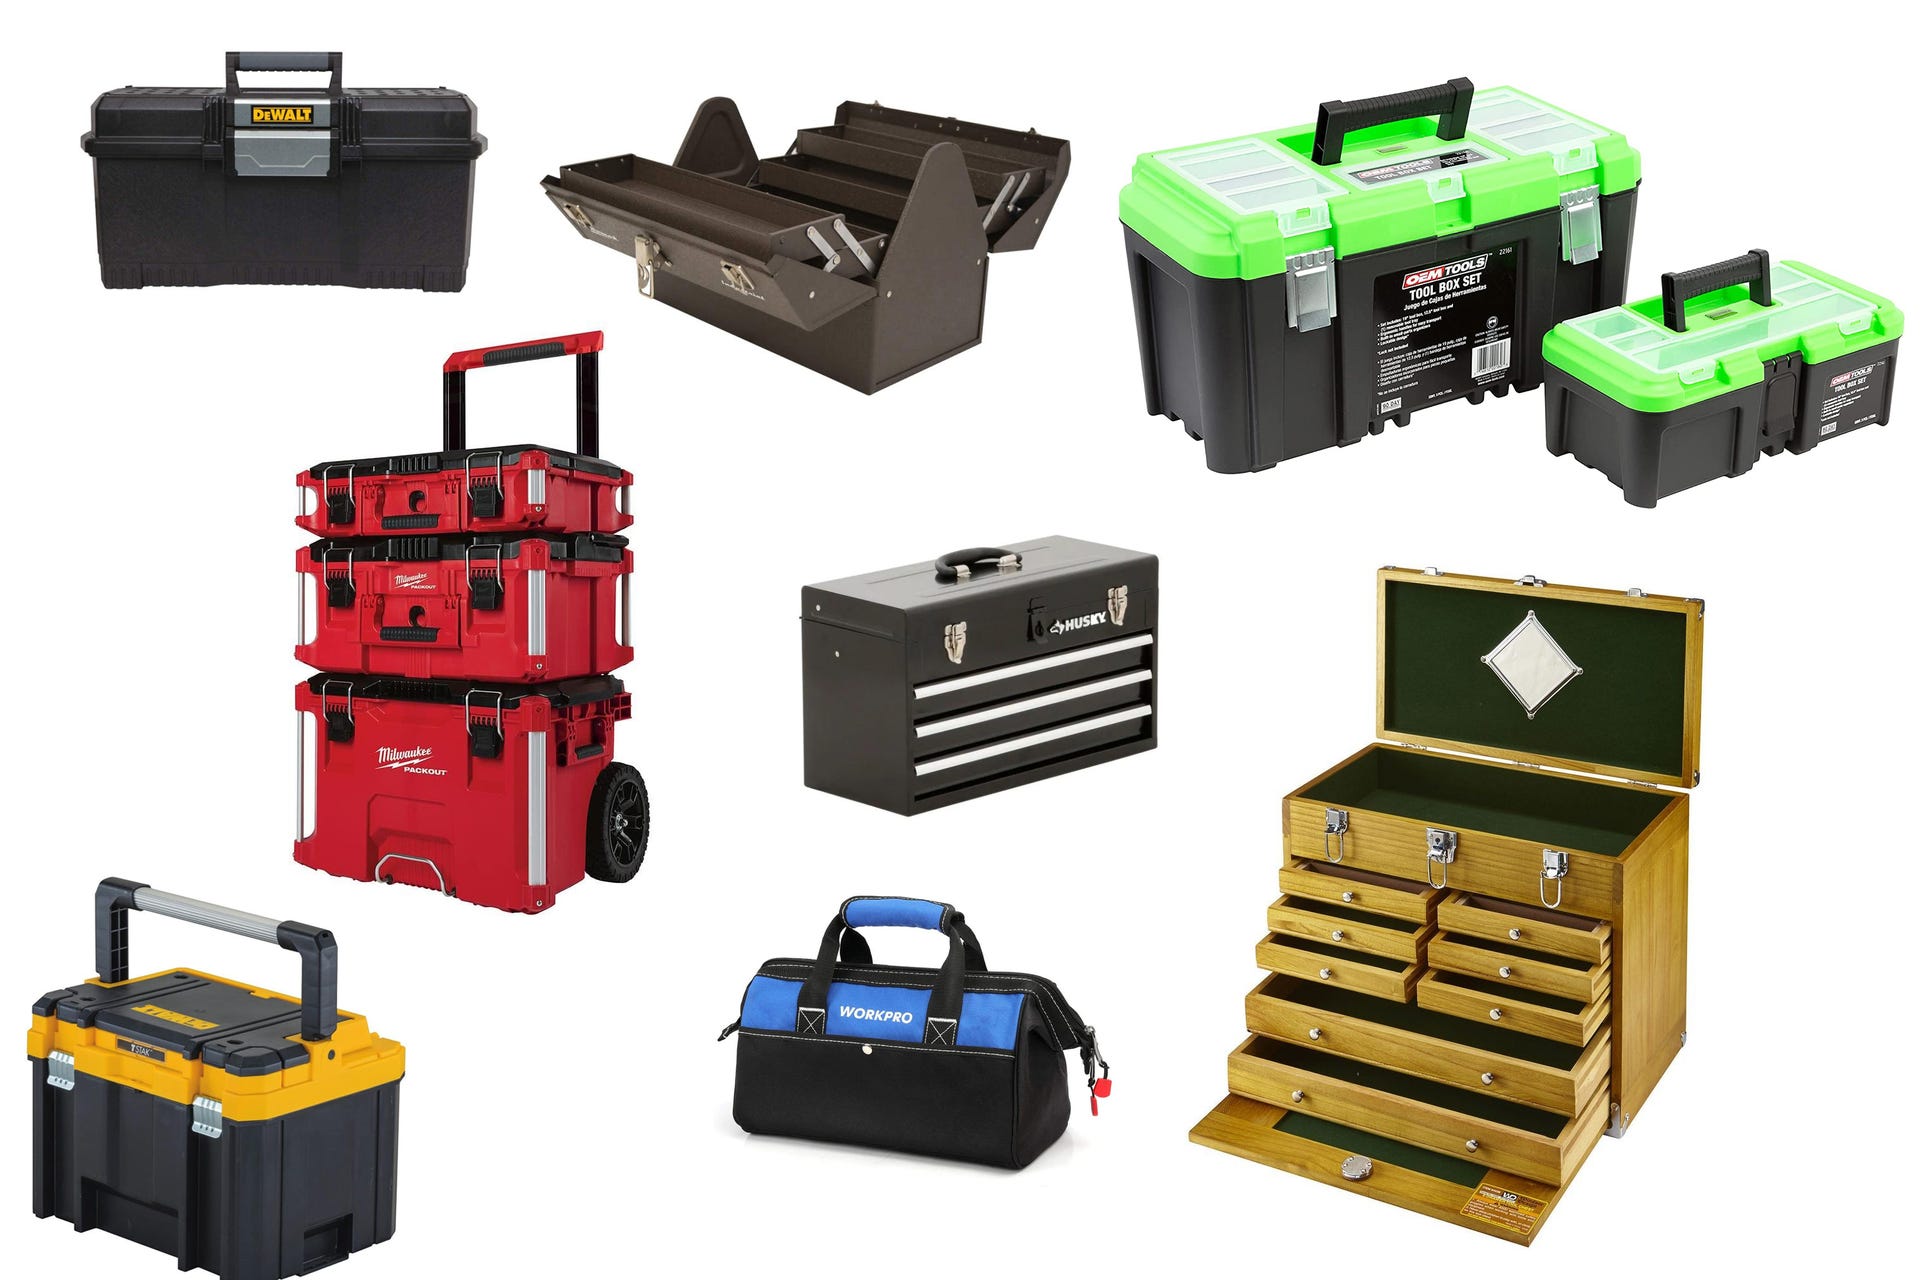 The 17 best tool boxes and kits of 2023, per an expert